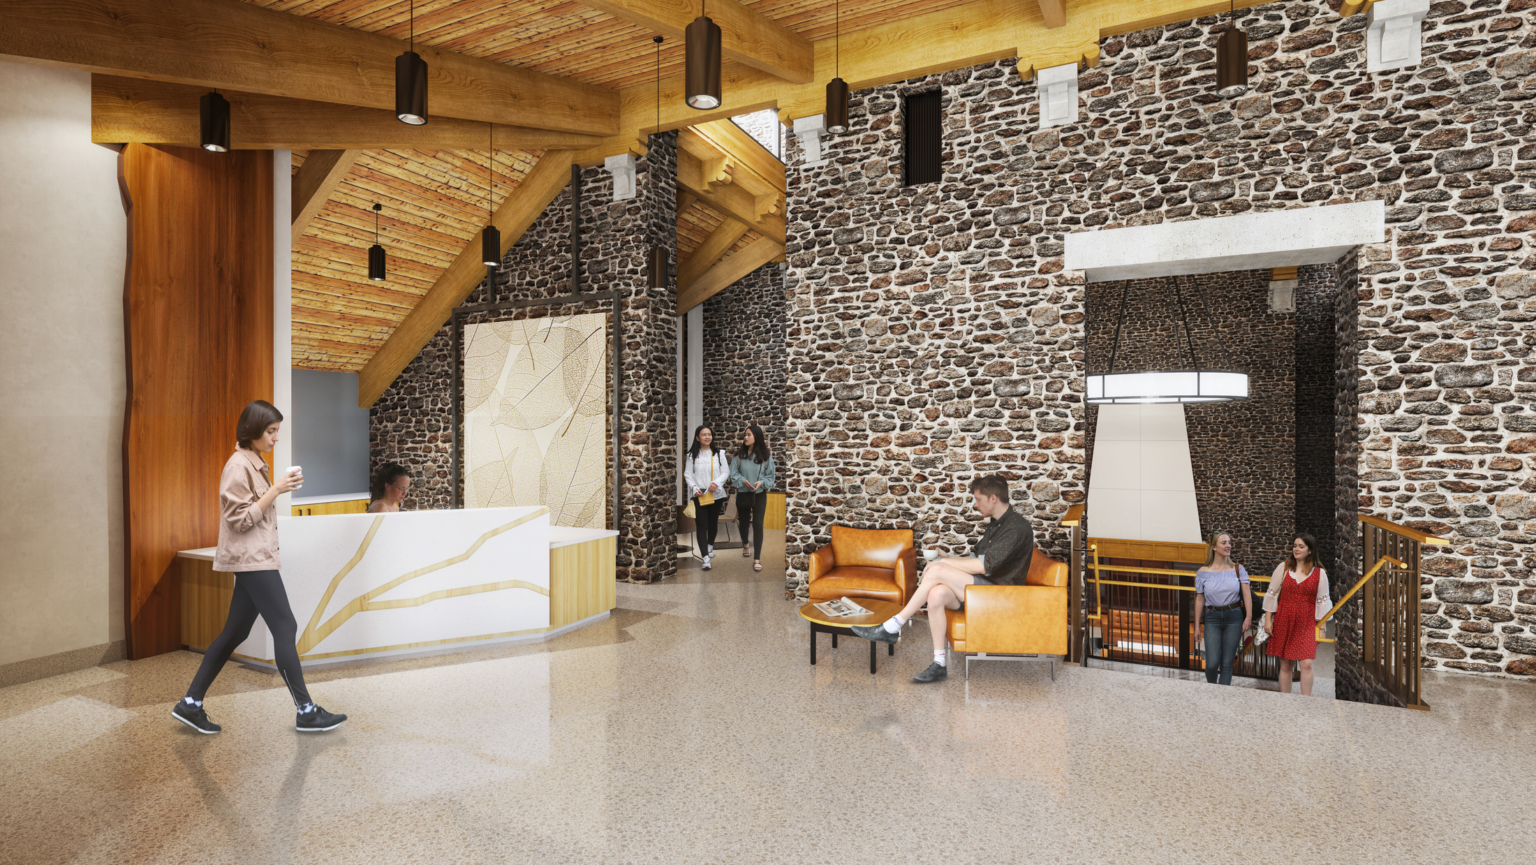 Front desk with stone accent wall, wood beams, and drop lighting at Swarthmore College Dining and Community Commons.